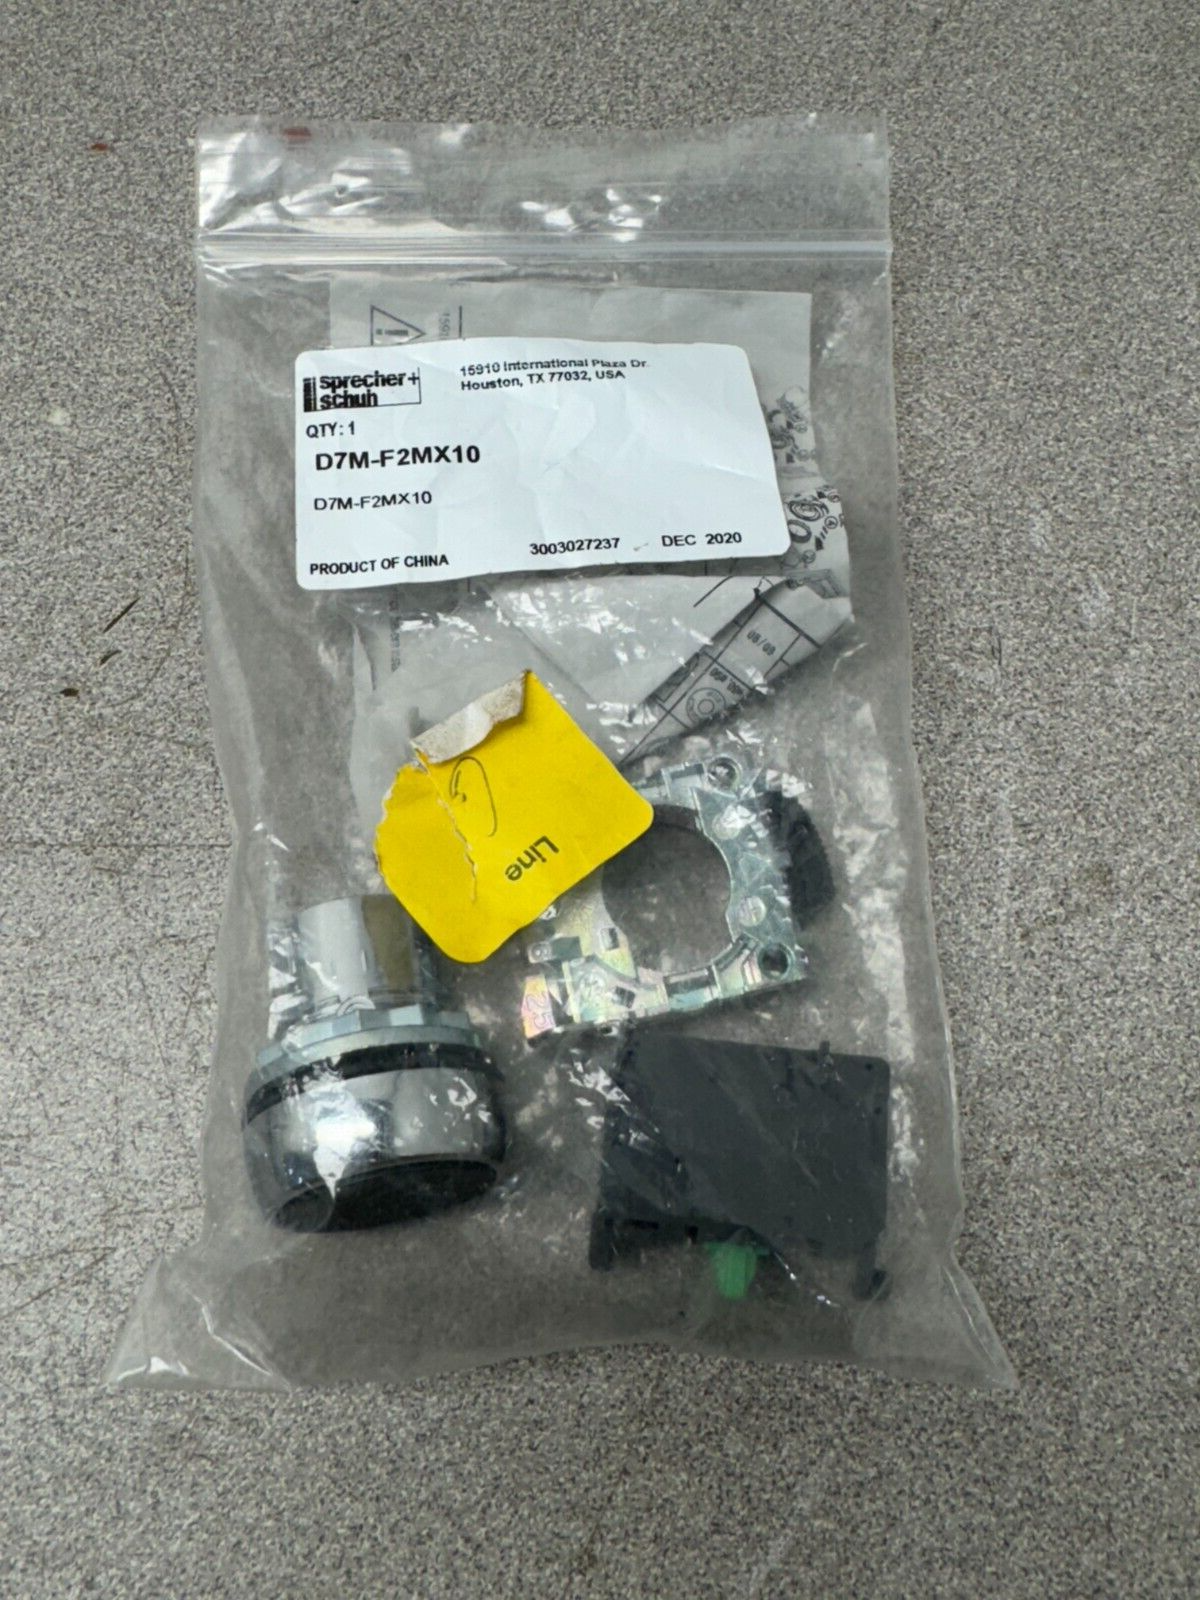 NEW IN PACKAGE SPRECHER SCHUH PUSH BUTTON SWITCH D7M-F2MX10